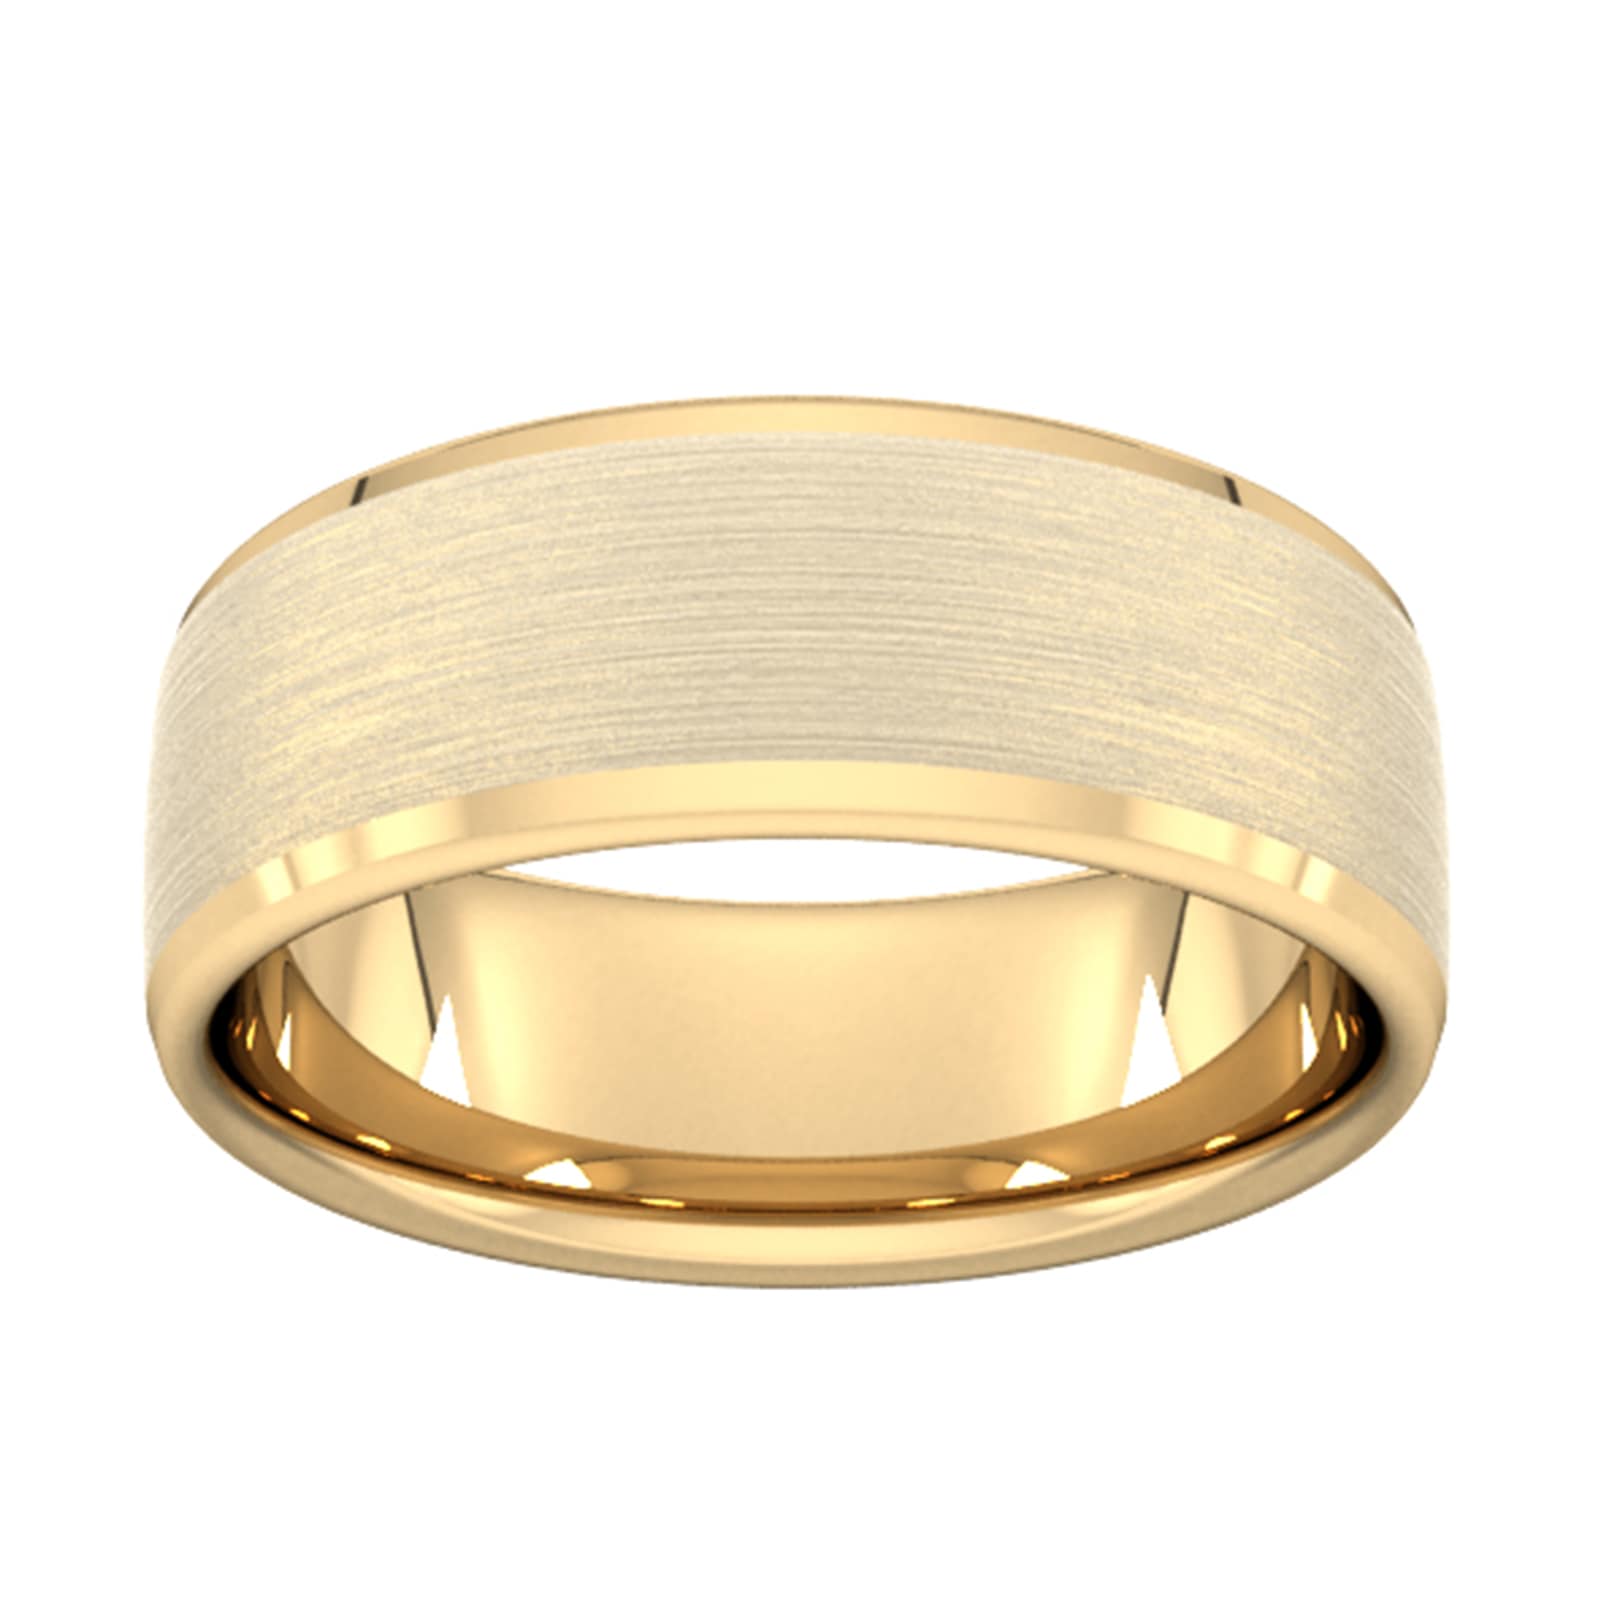 8mm Flat Court Heavy Polished Chamfered Edges With Matt Centre Wedding Ring In 9 Carat Yellow Gold - Ring Size V